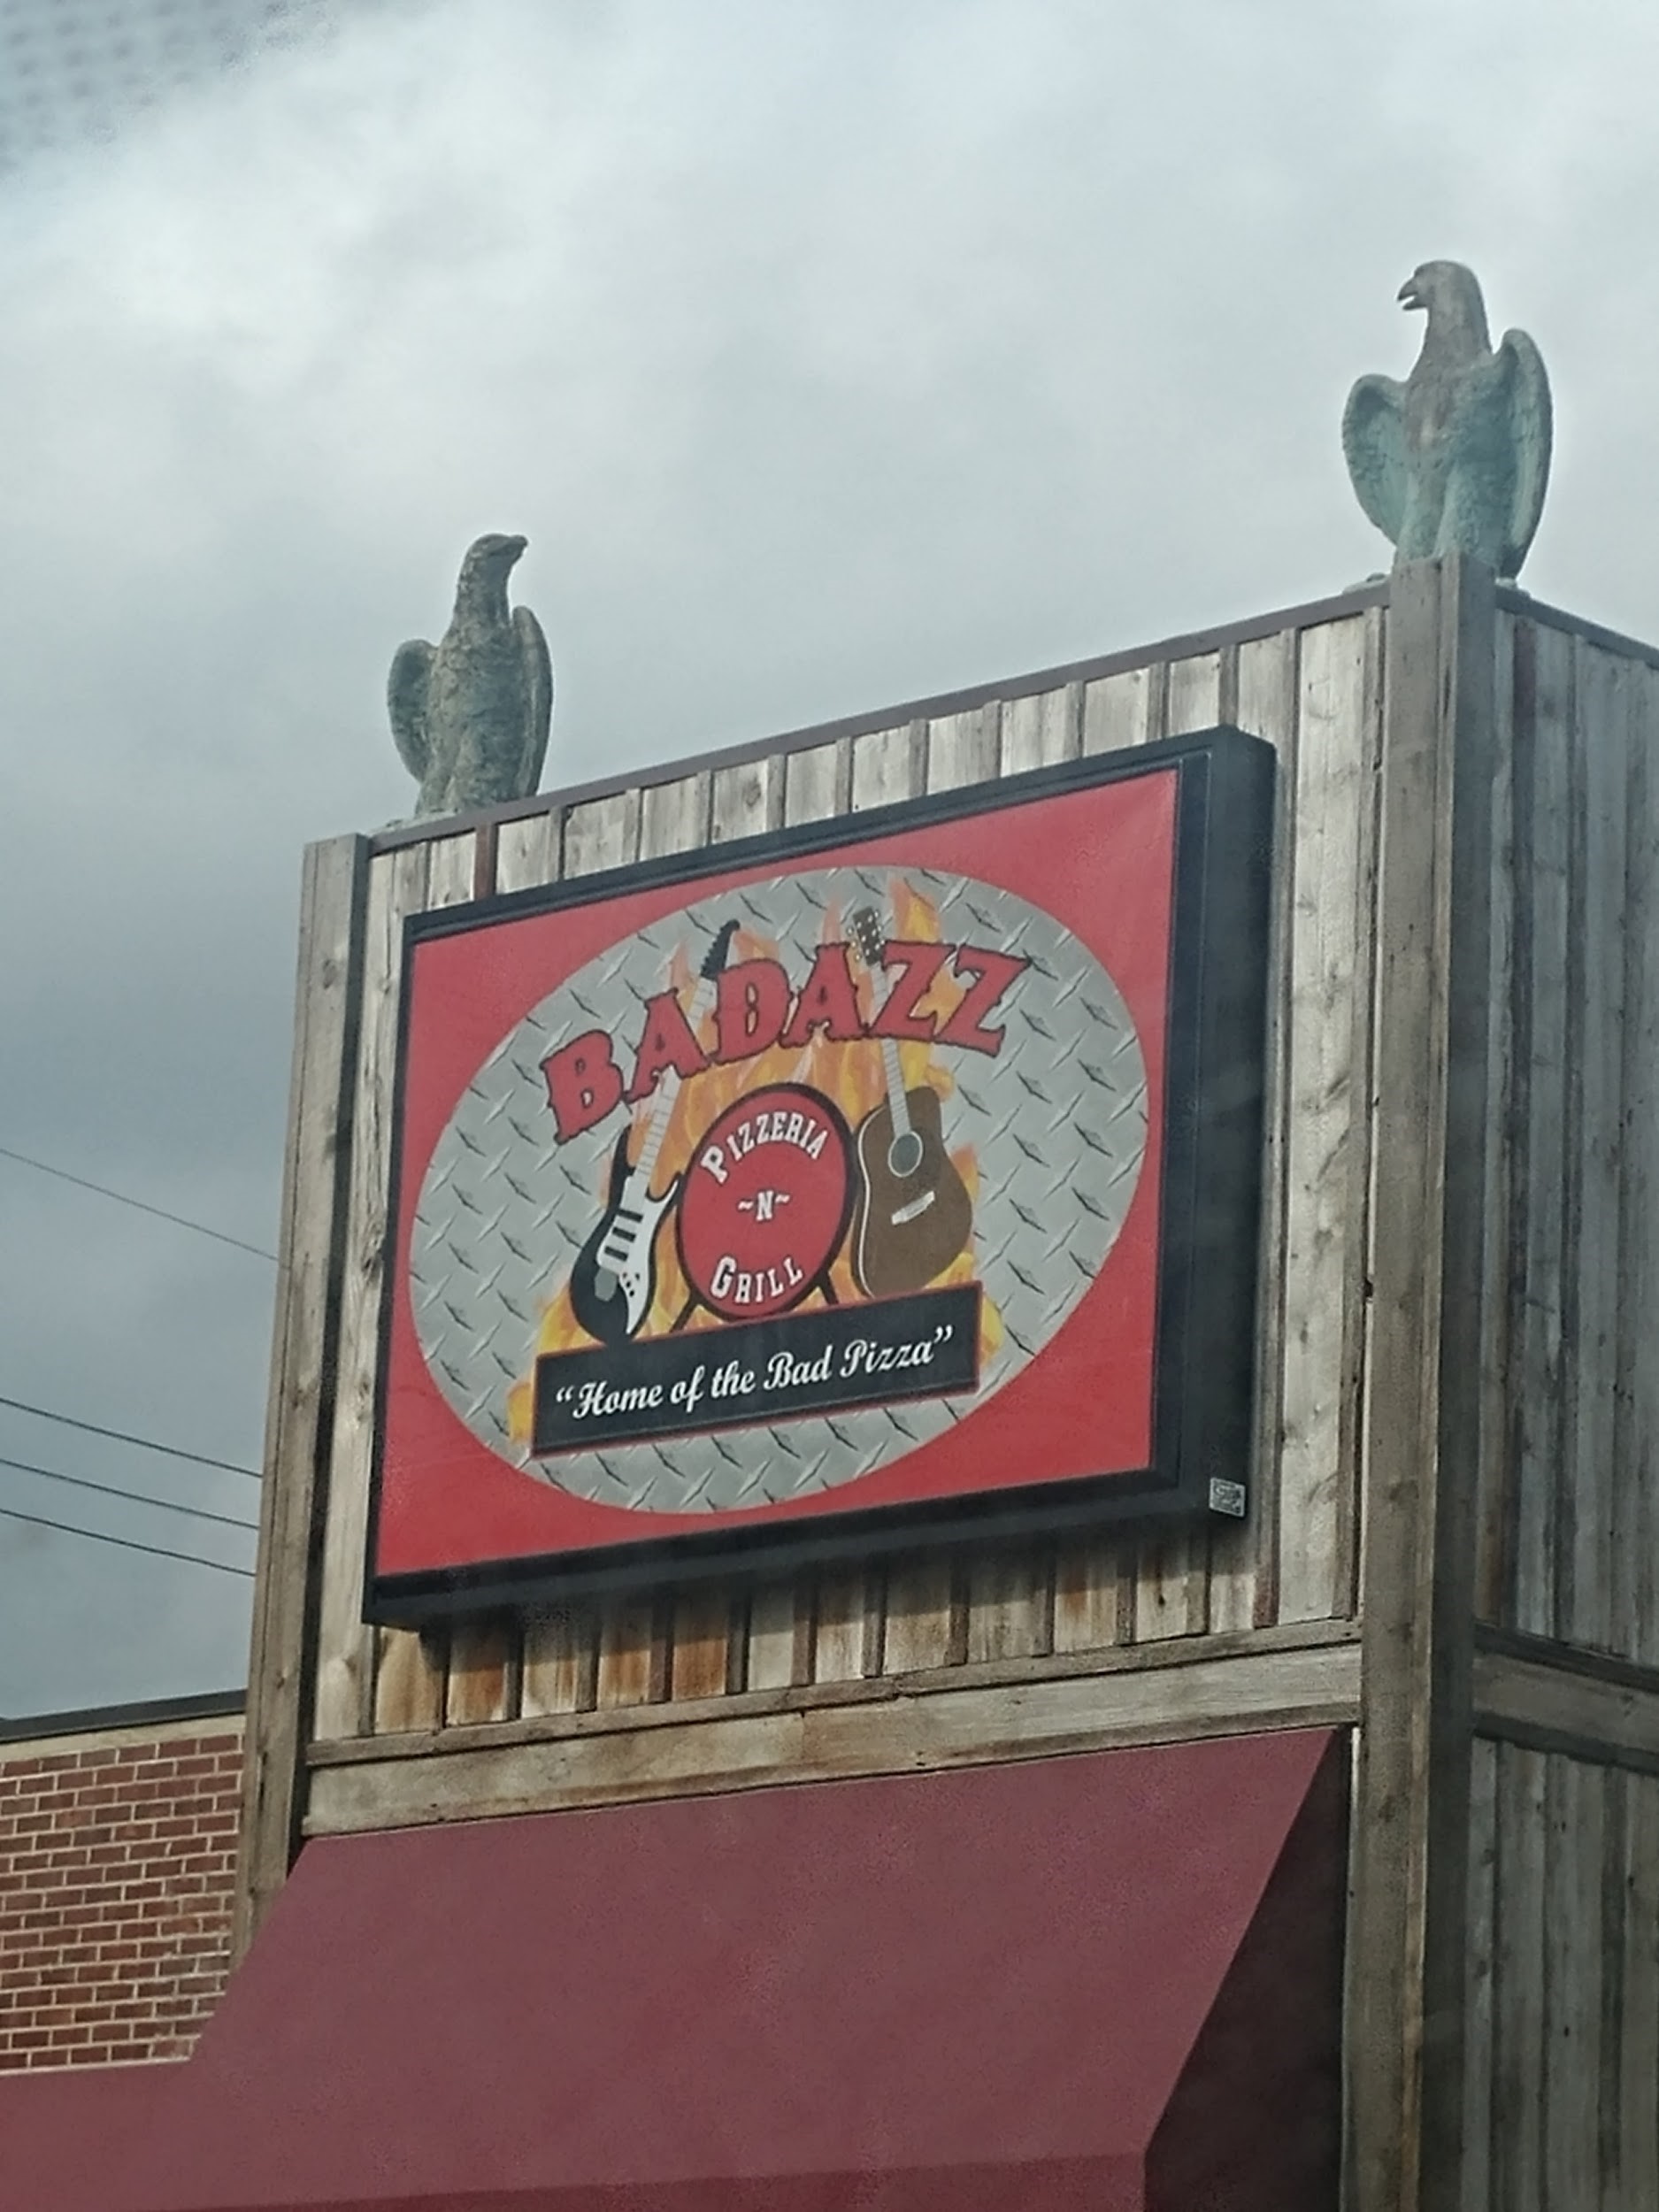 The restaurant's sign on the front wall of the building